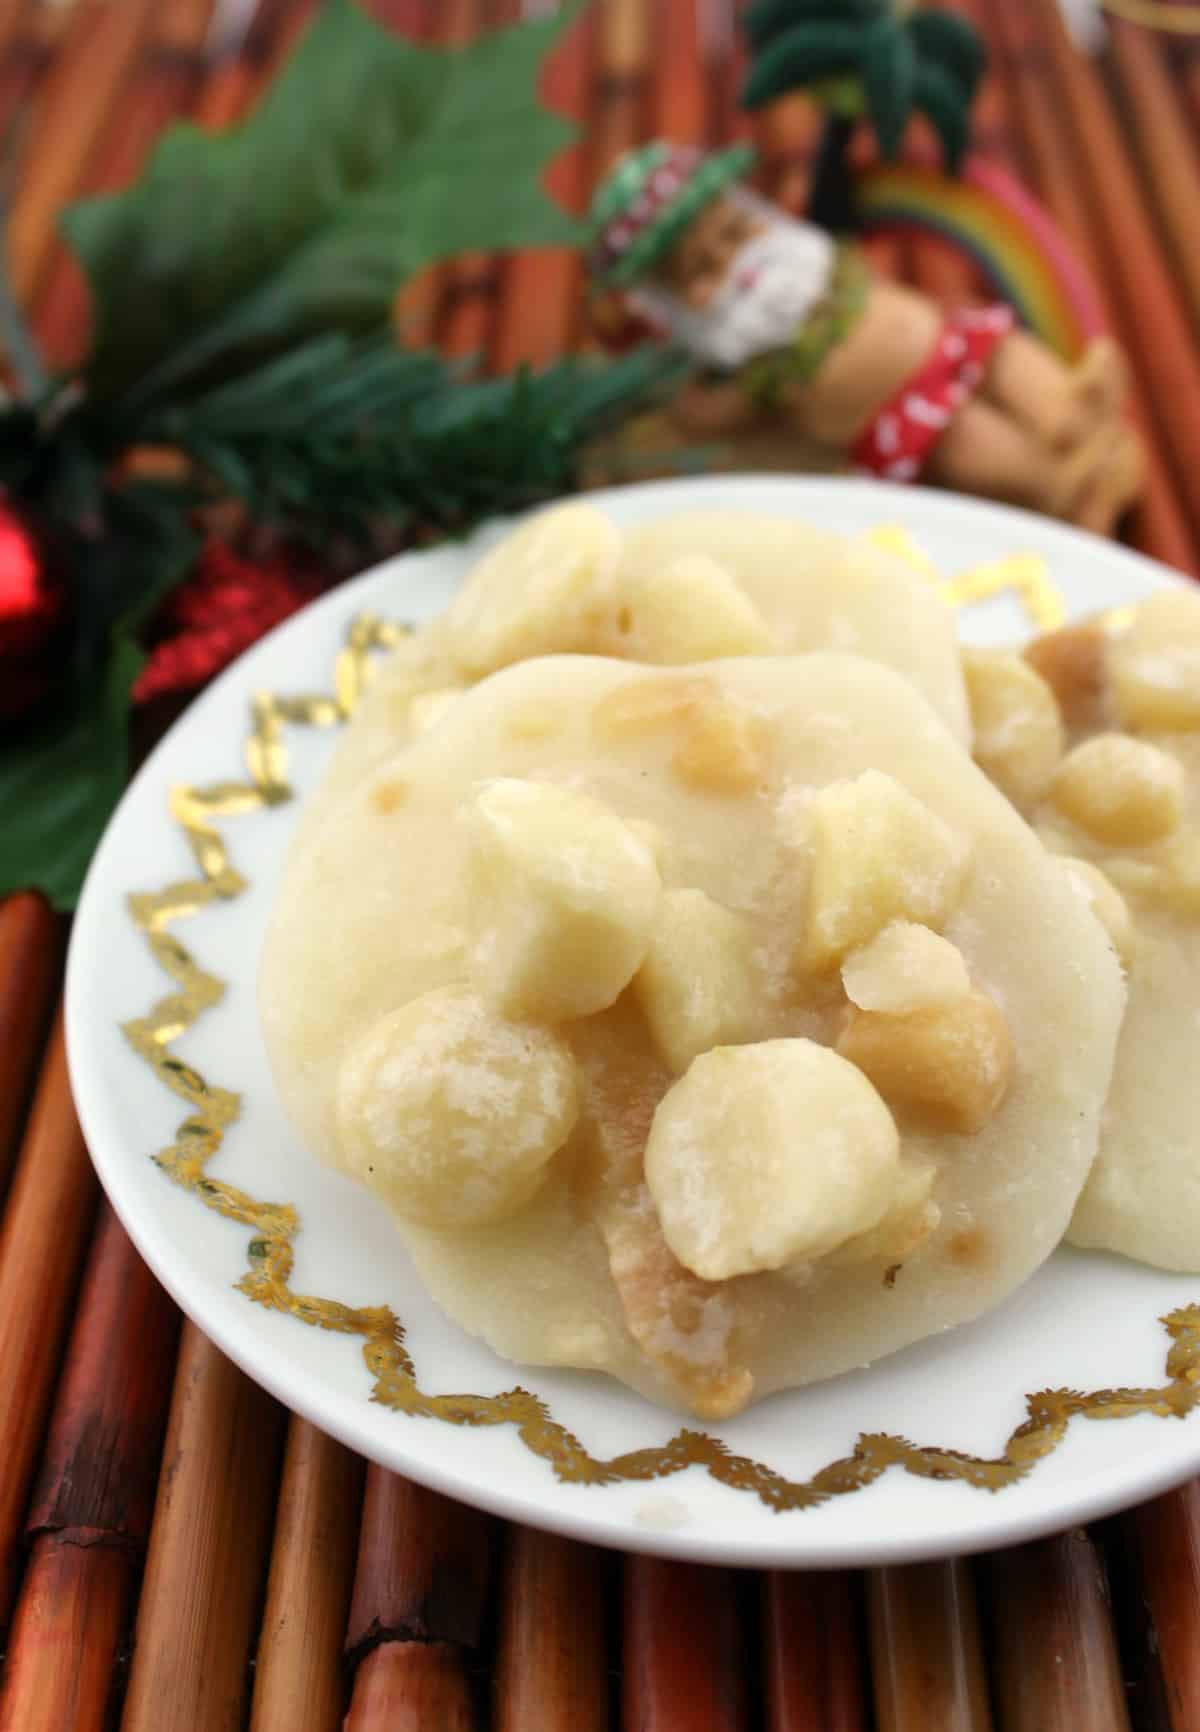 These Coconut-Macadamia Pralines are a little taste of tropical paradise in candy form! Made with just 5 ingredients, they're a great DIY holiday gift for family and friends.